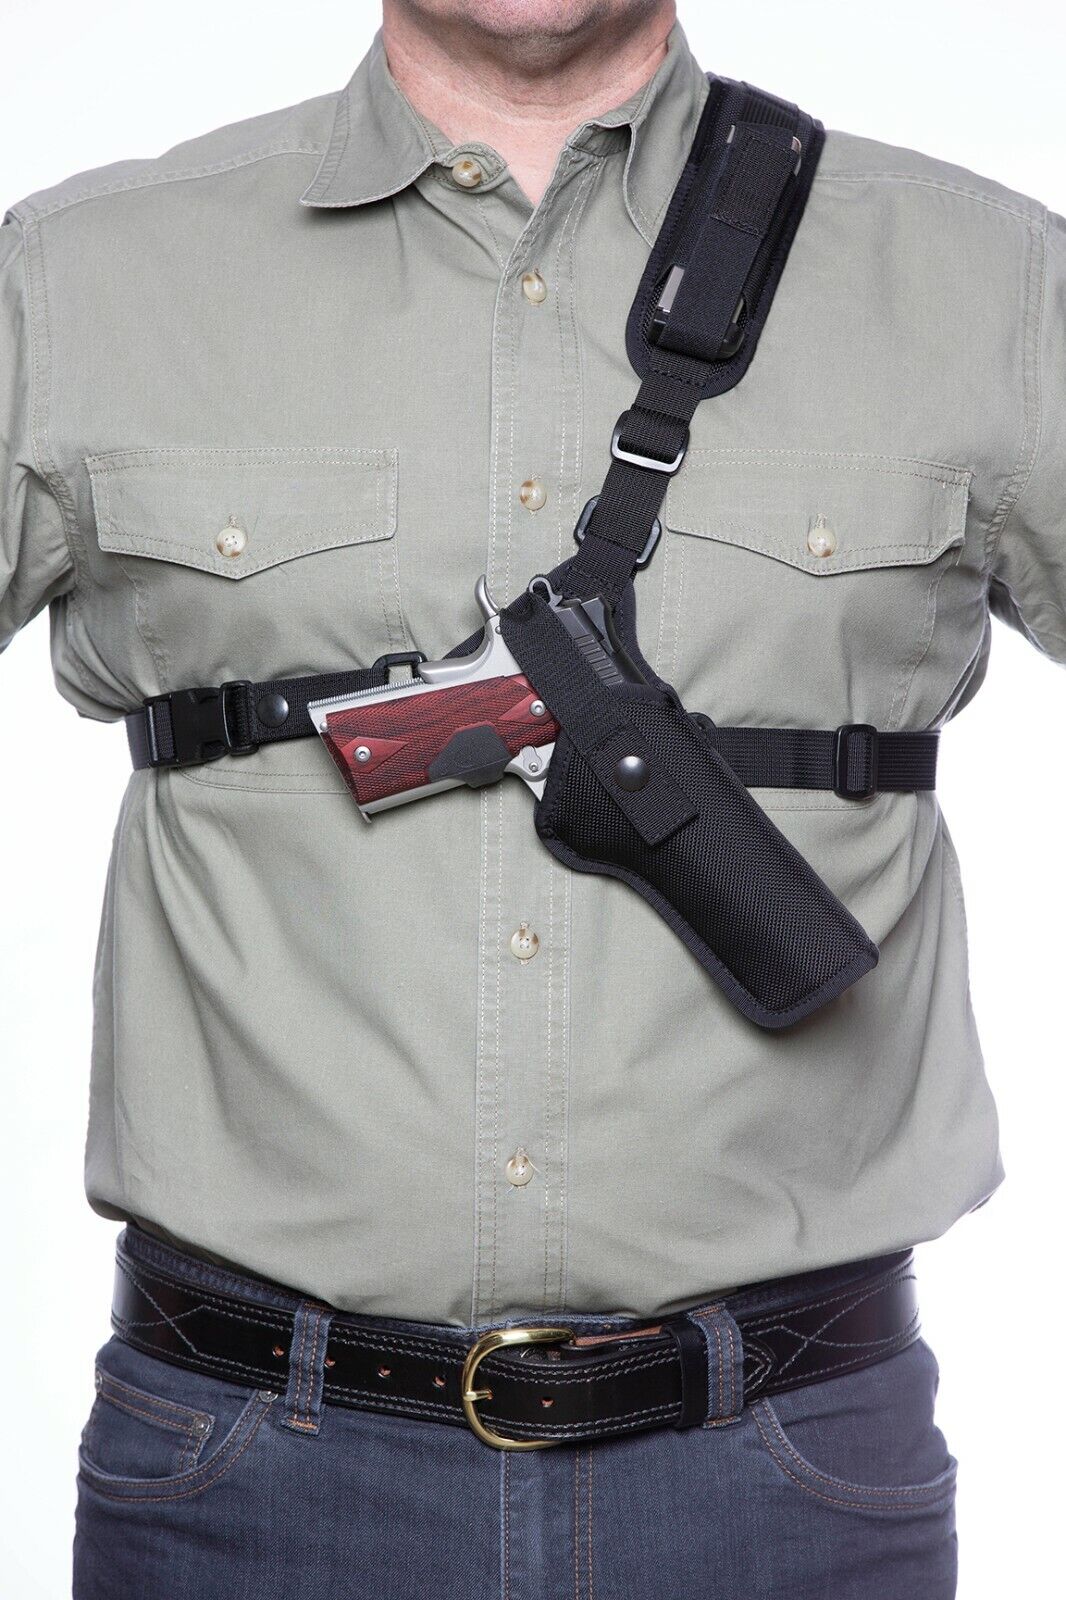 The Denali™ Chest Holster - MADE IN THE USA - The ULTIMATE gun holster